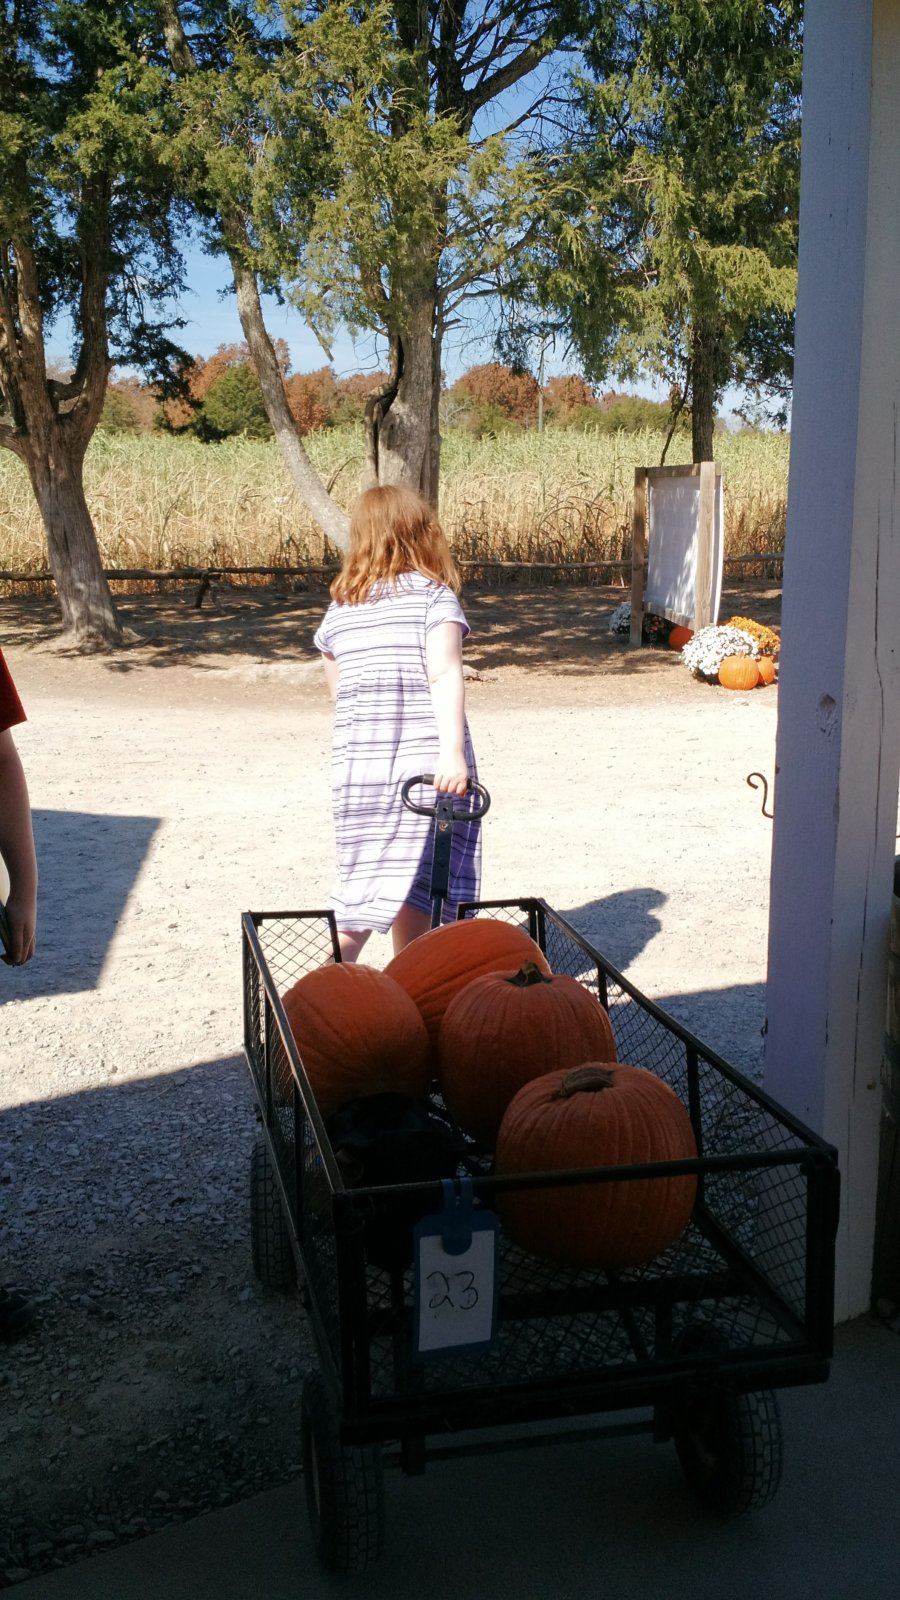 Yessa pulled this in from the parking lot to be kind, and we were grateful to have it to carry our pumpkins back to the car. 